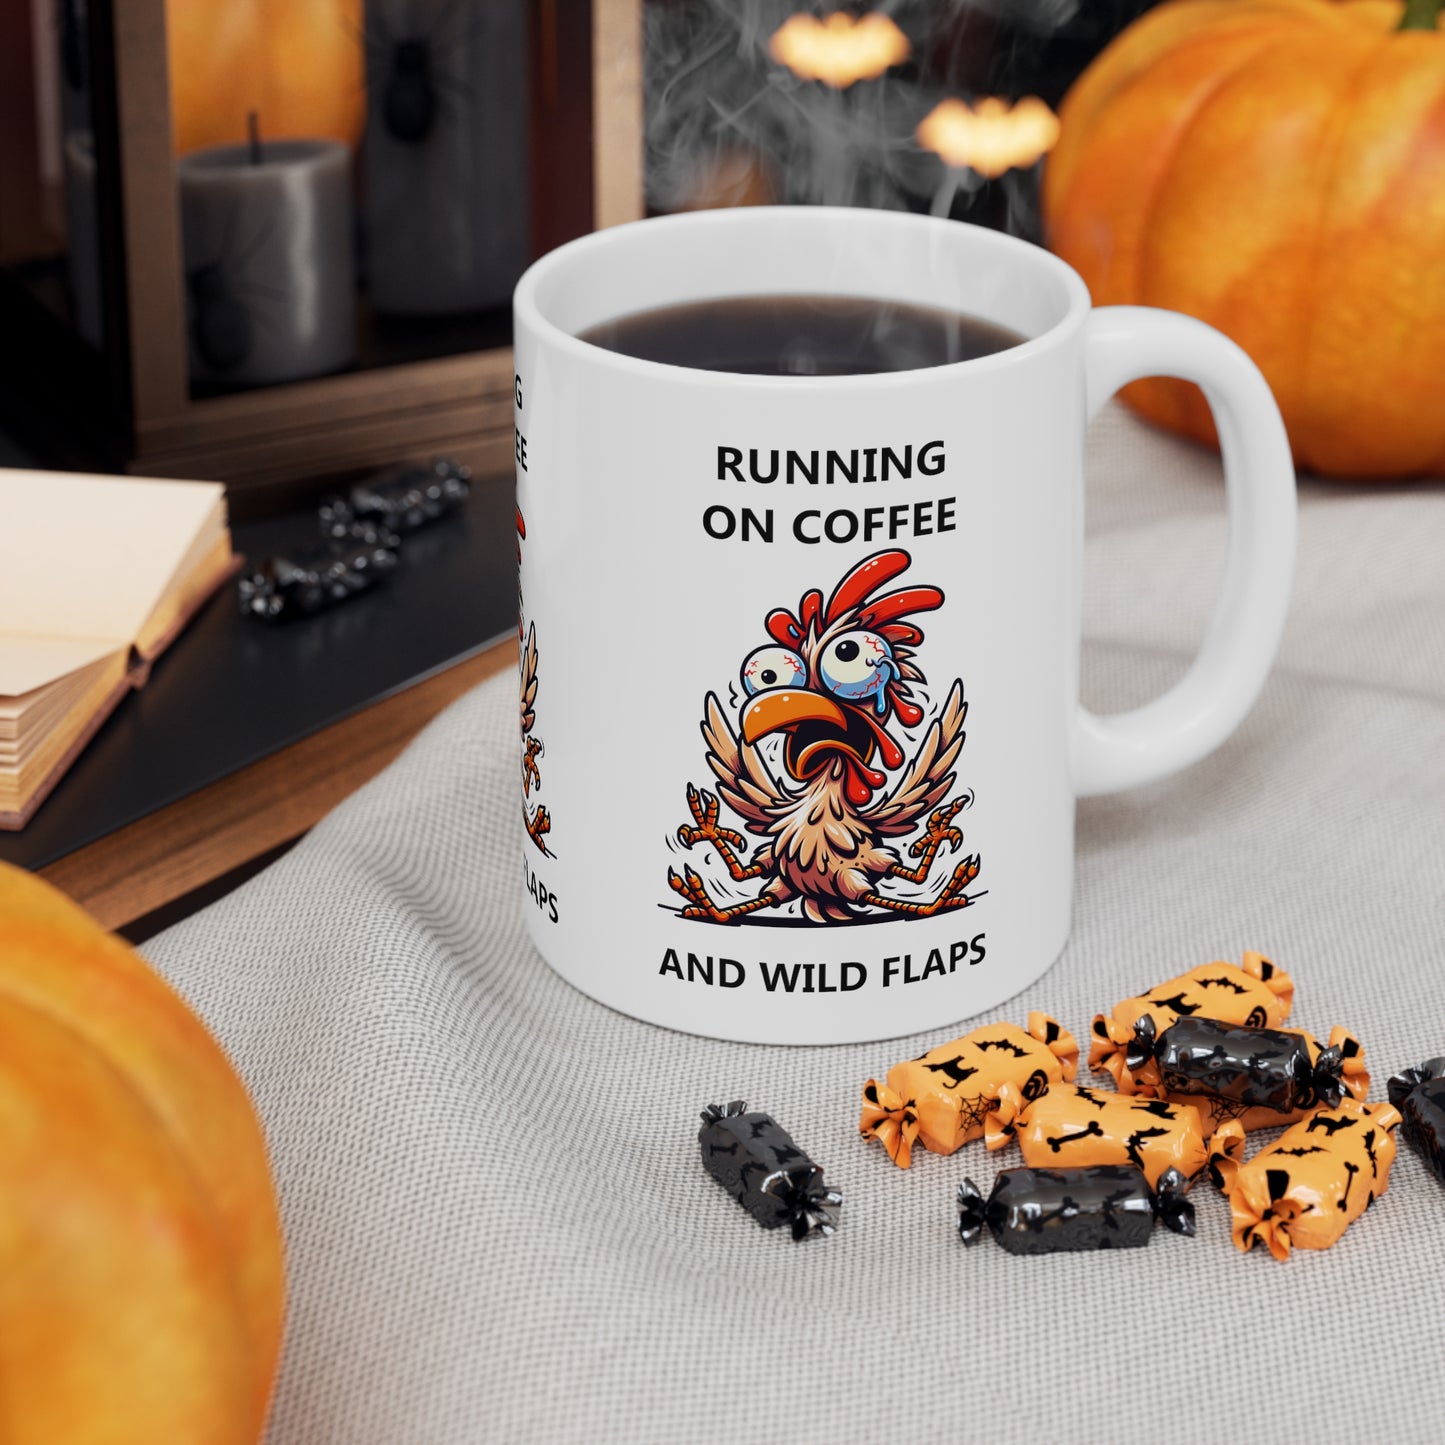 Running on Coffee Mug, Funny Chicken Art Ceramic Cup Tea Office Boss Coworker Friend Unique Microwave Safe Novelty Cool Gift